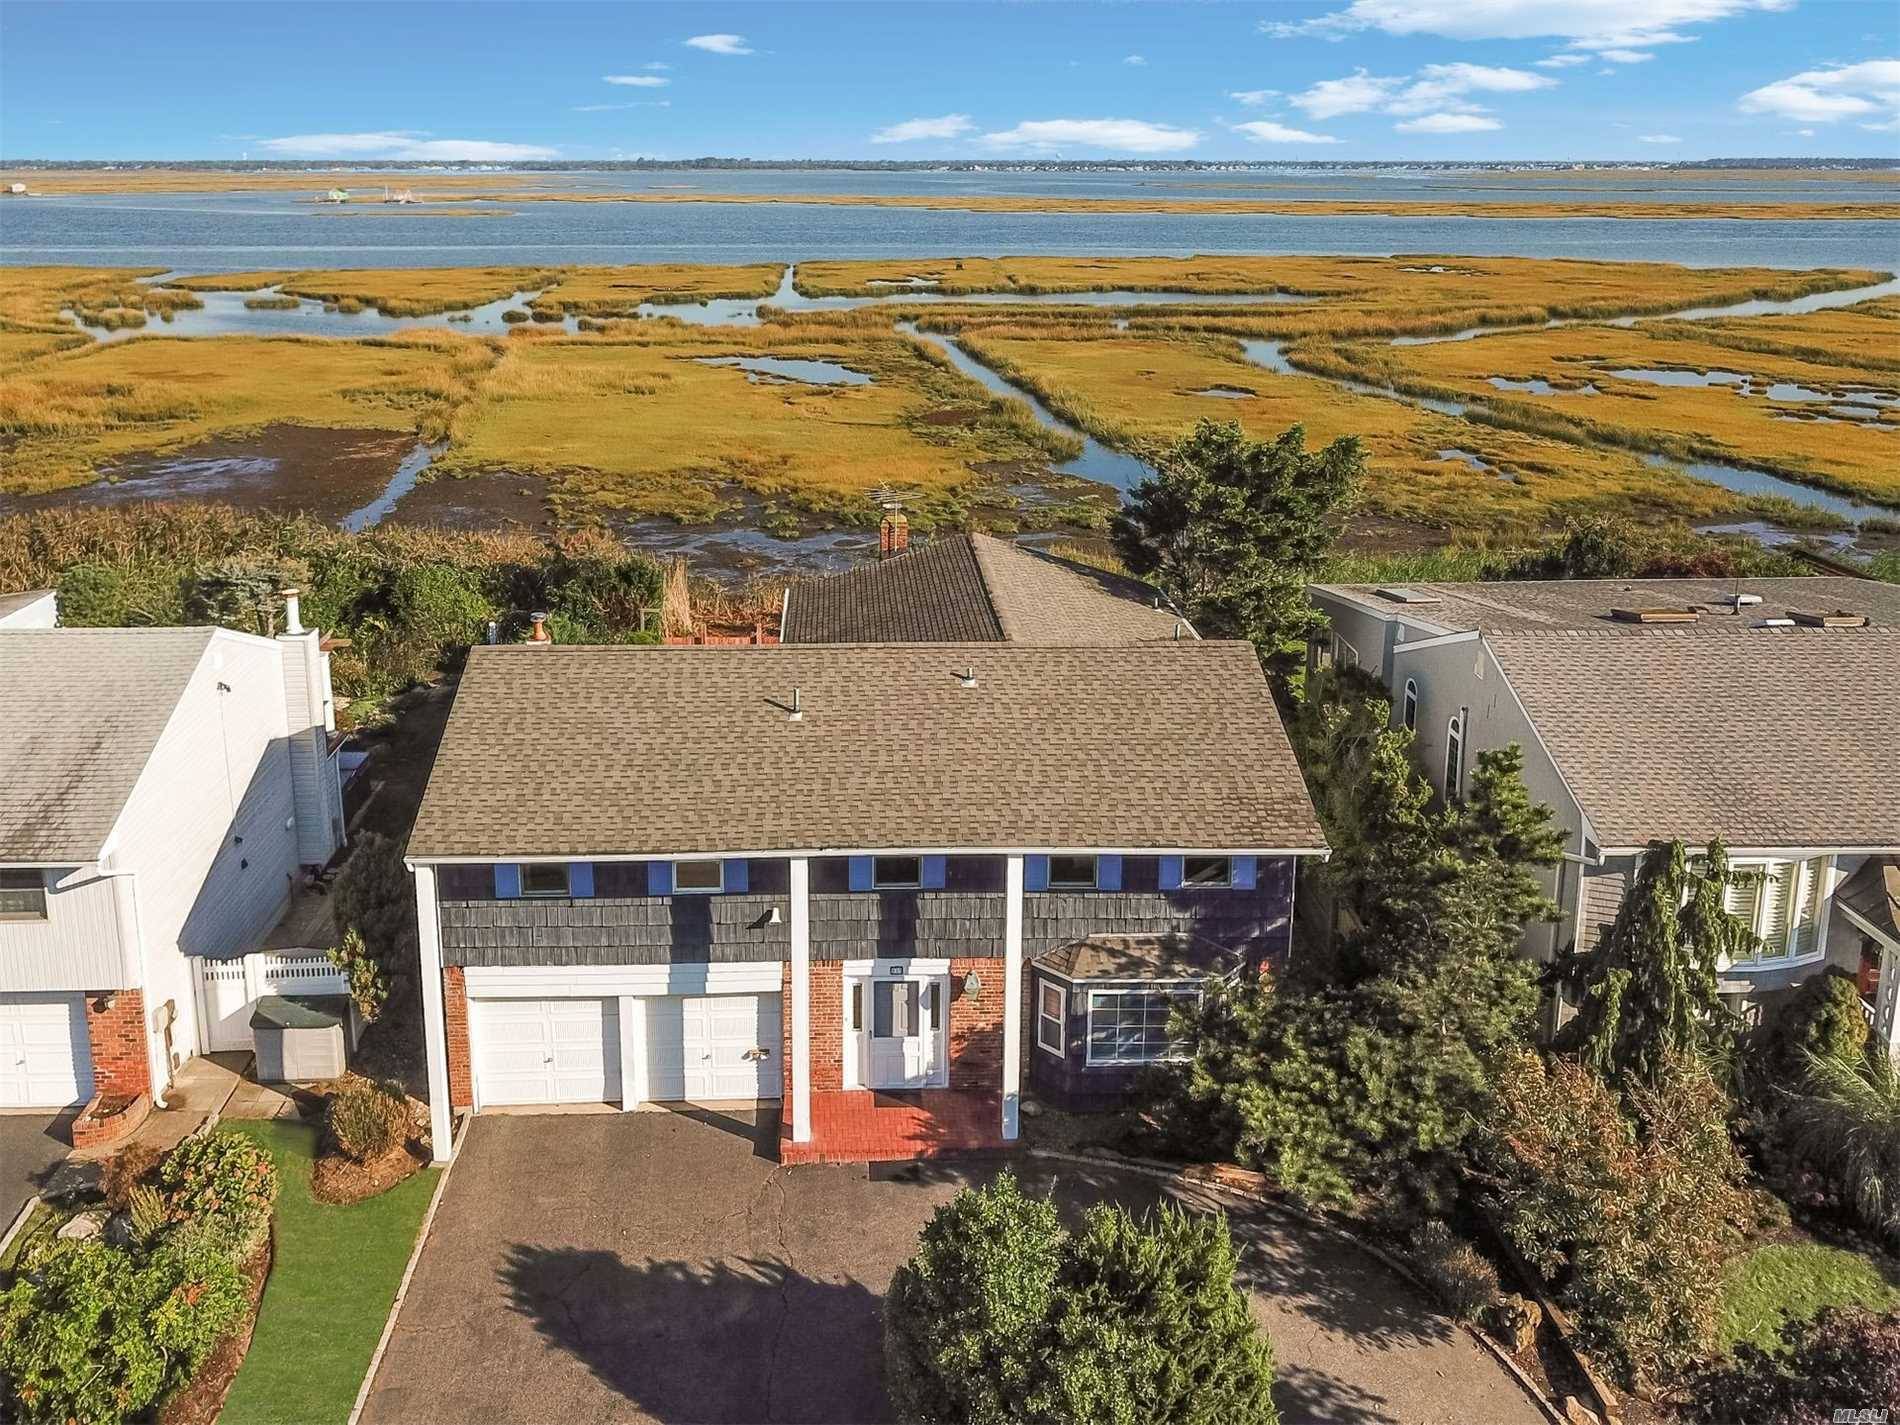 Amazing Location, Residence With Tranquil Views Of The Bay.